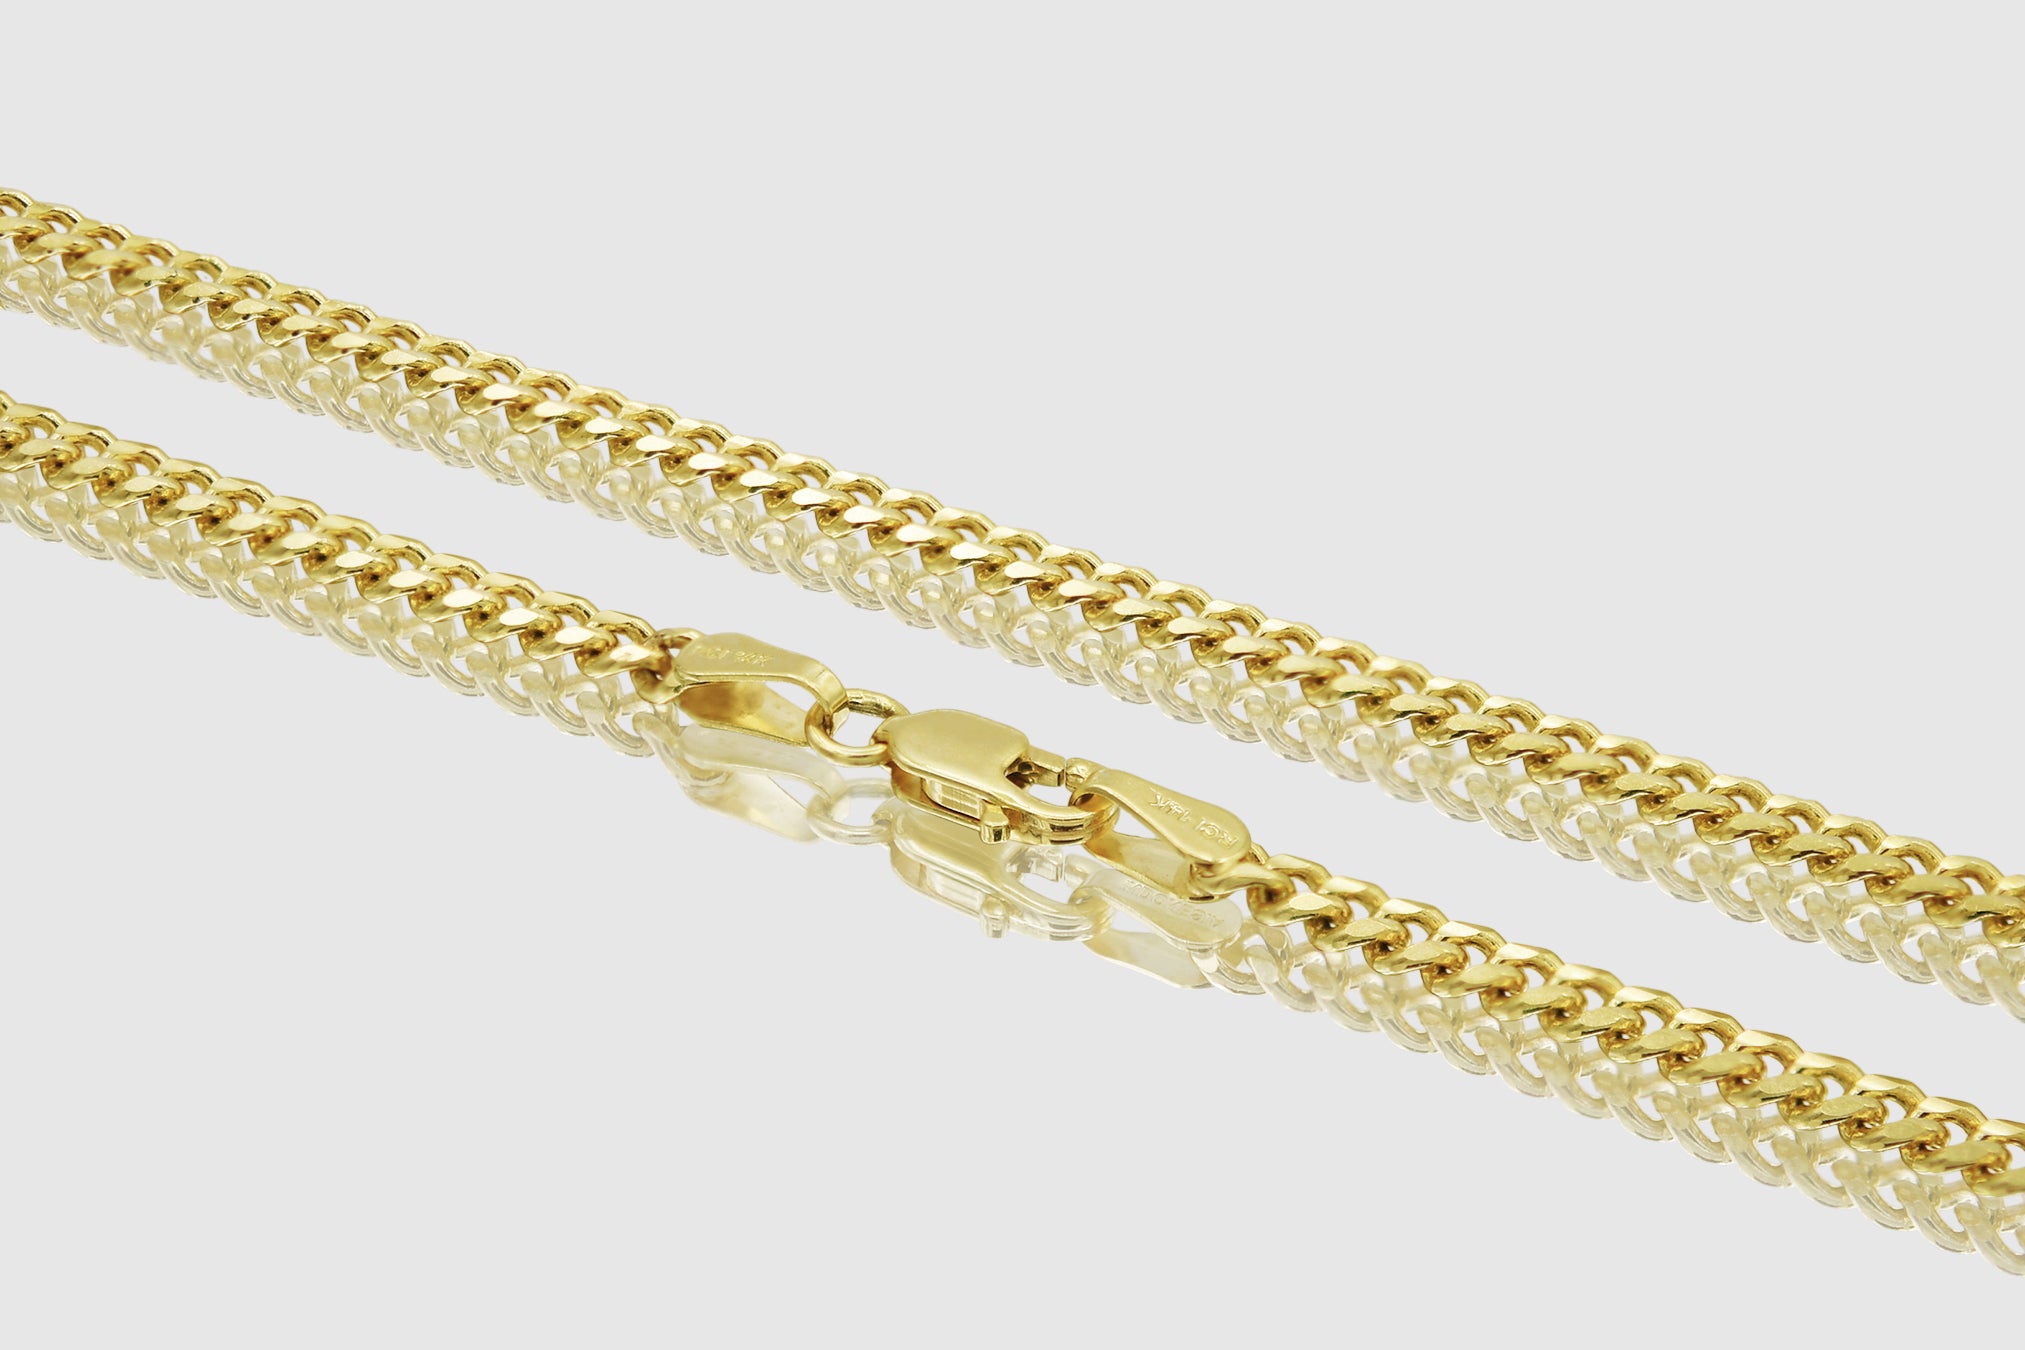 Cuban Link Drop Chain Diamond Earring 14K Yellow Gold / Pair by Baby Gold - Shop Custom Gold Jewelry